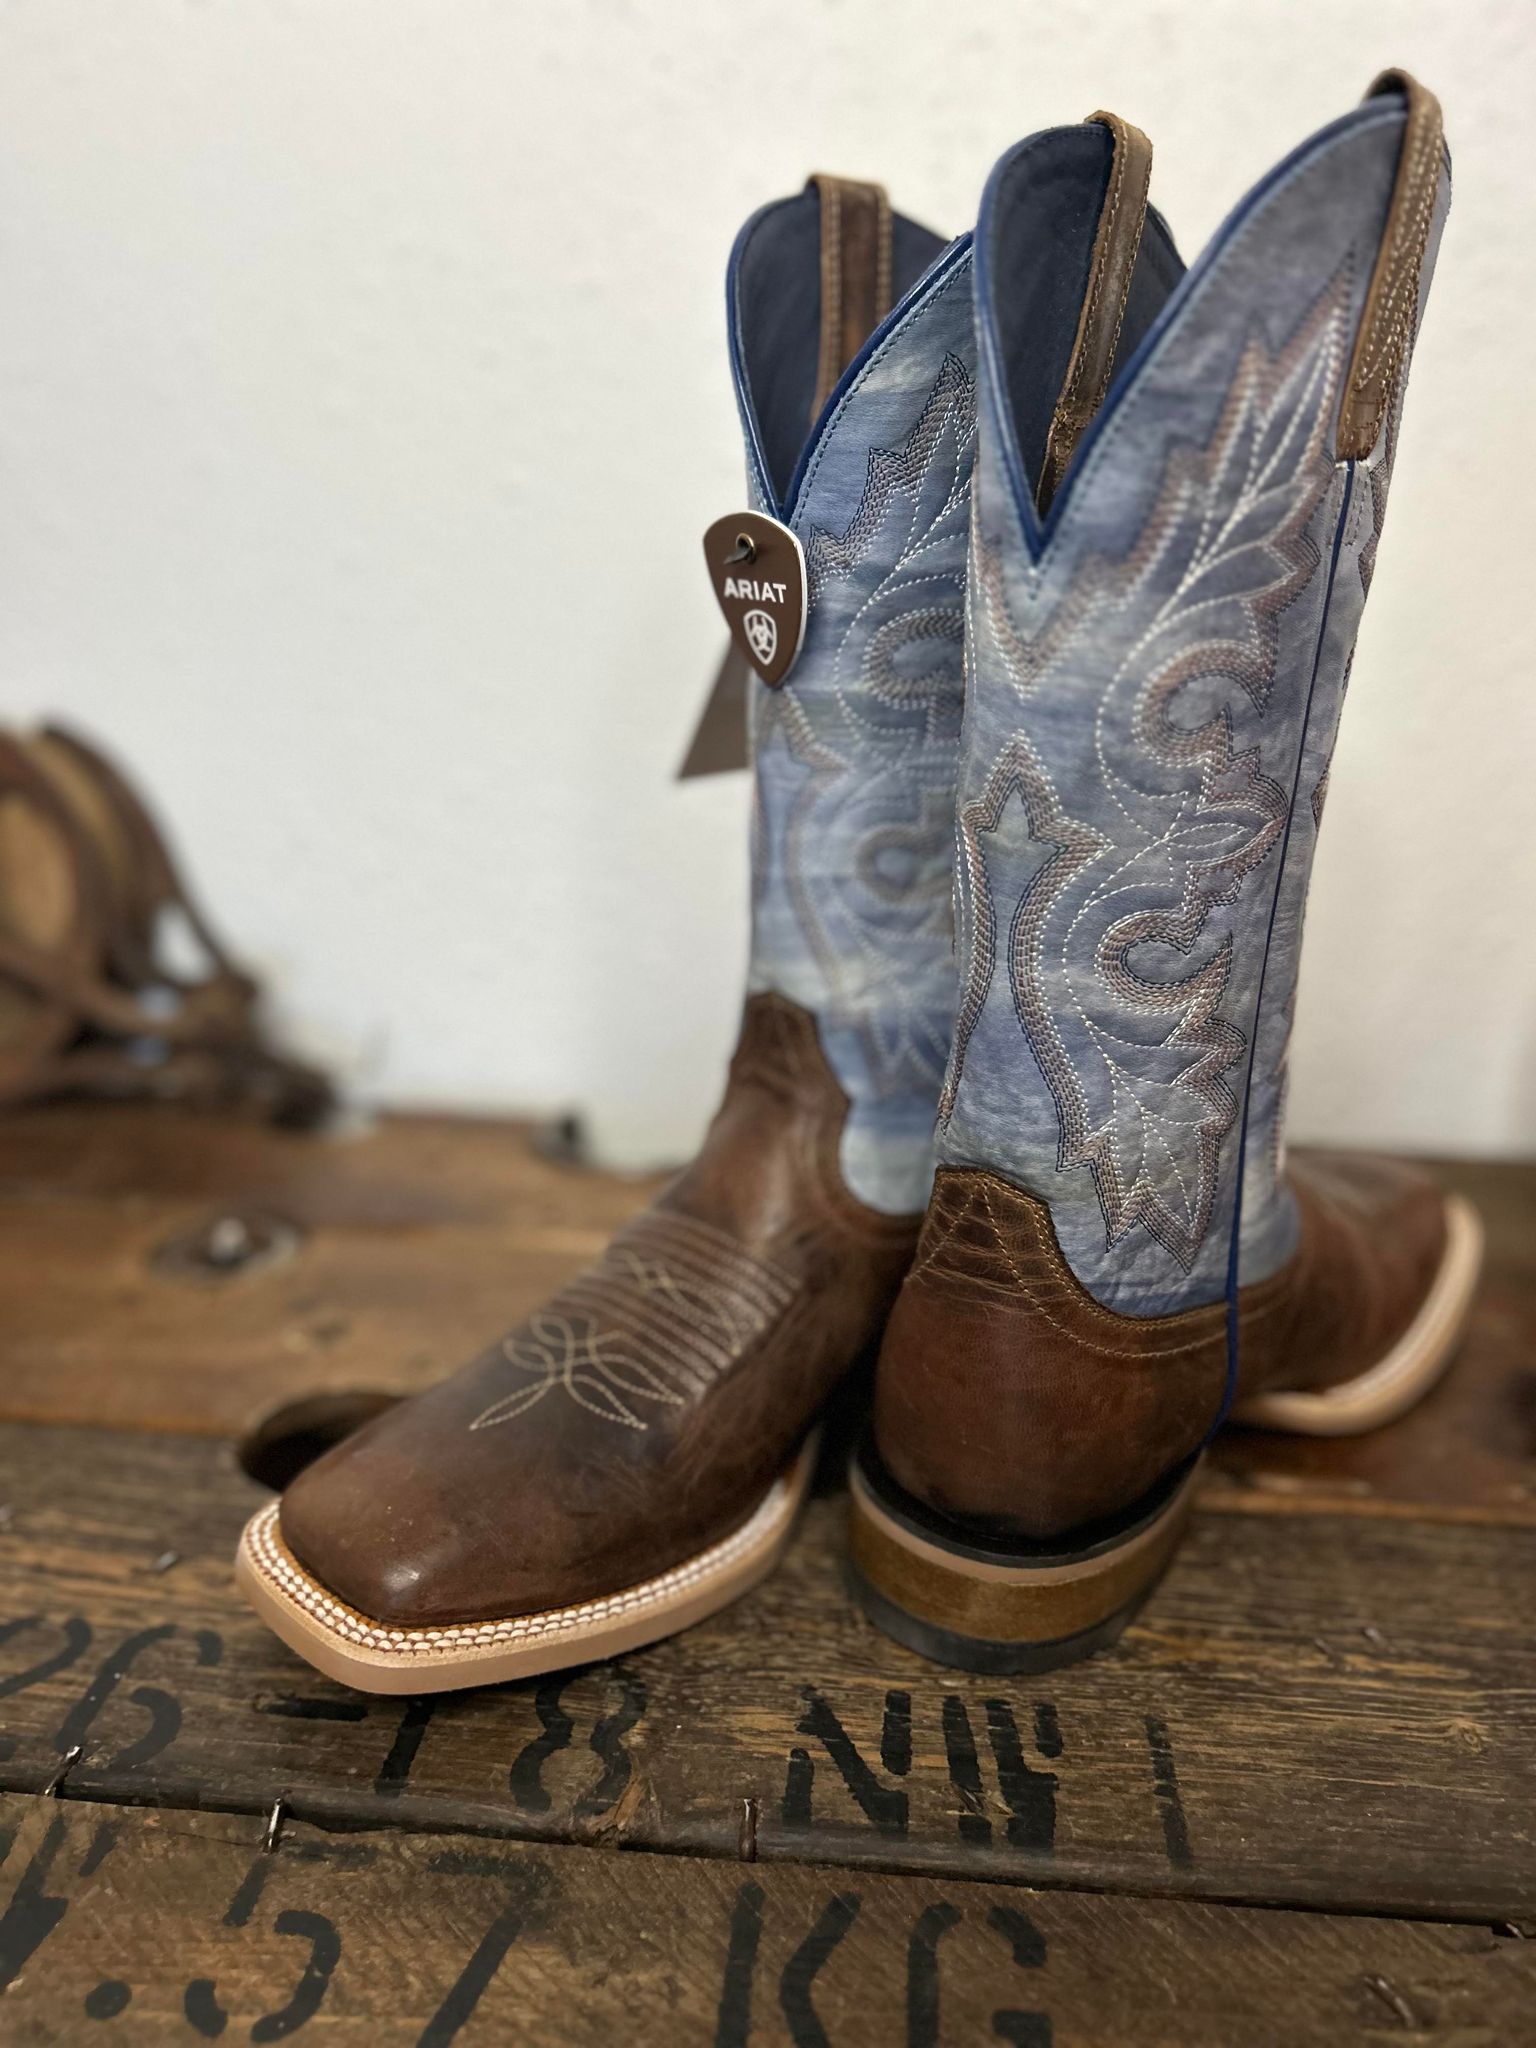 Men's Ariat Standout Cowboy Boot-Men's Boots-Ariat-Lucky J Boots & More, Women's, Men's, & Kids Western Store Located in Carthage, MO